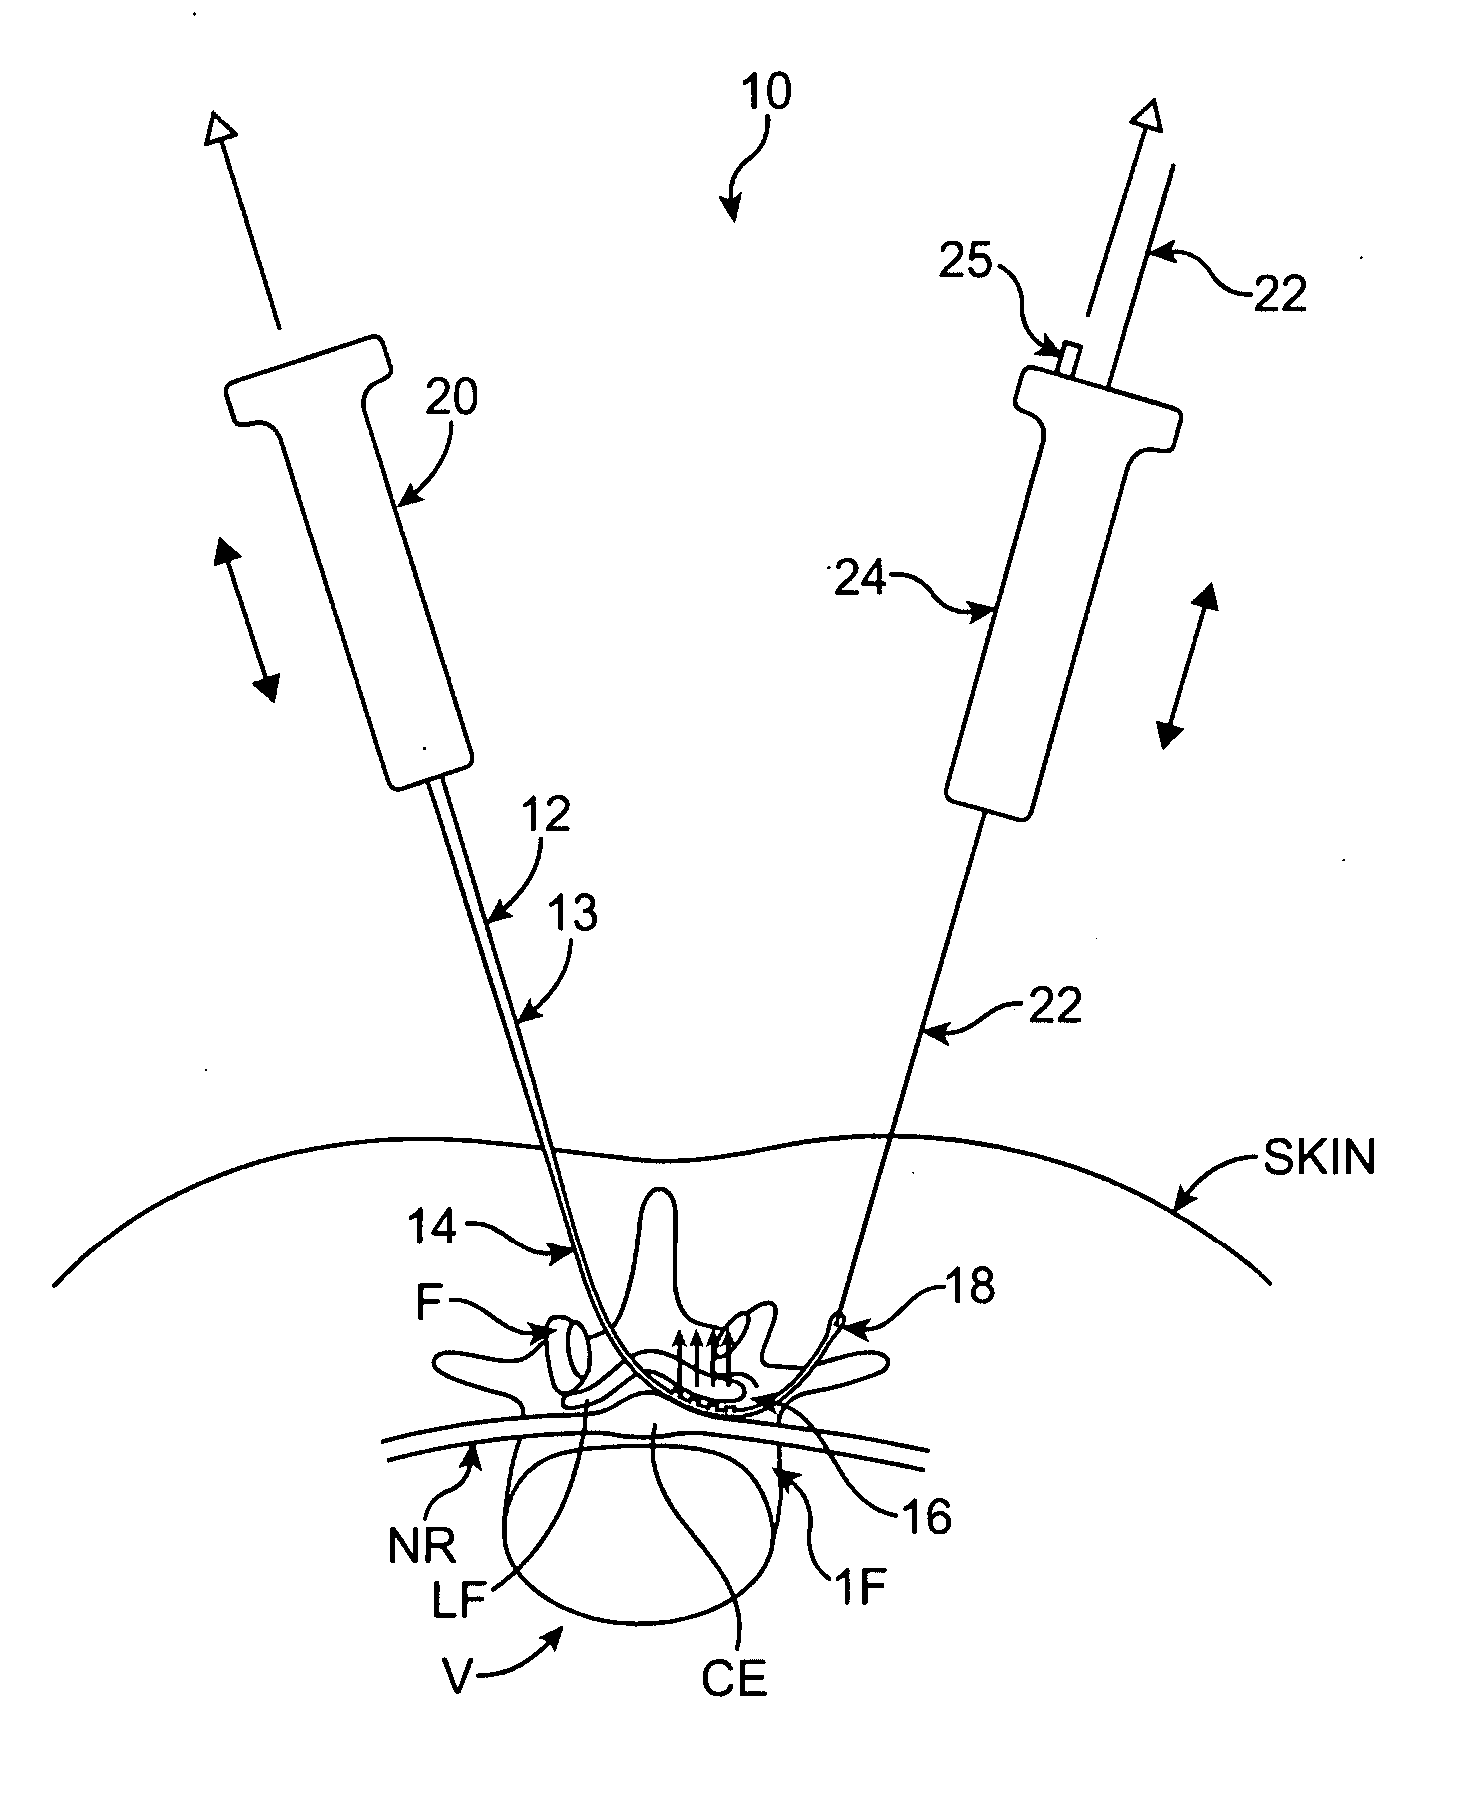 Tissue Removal with at Least Partially Flexible Devices